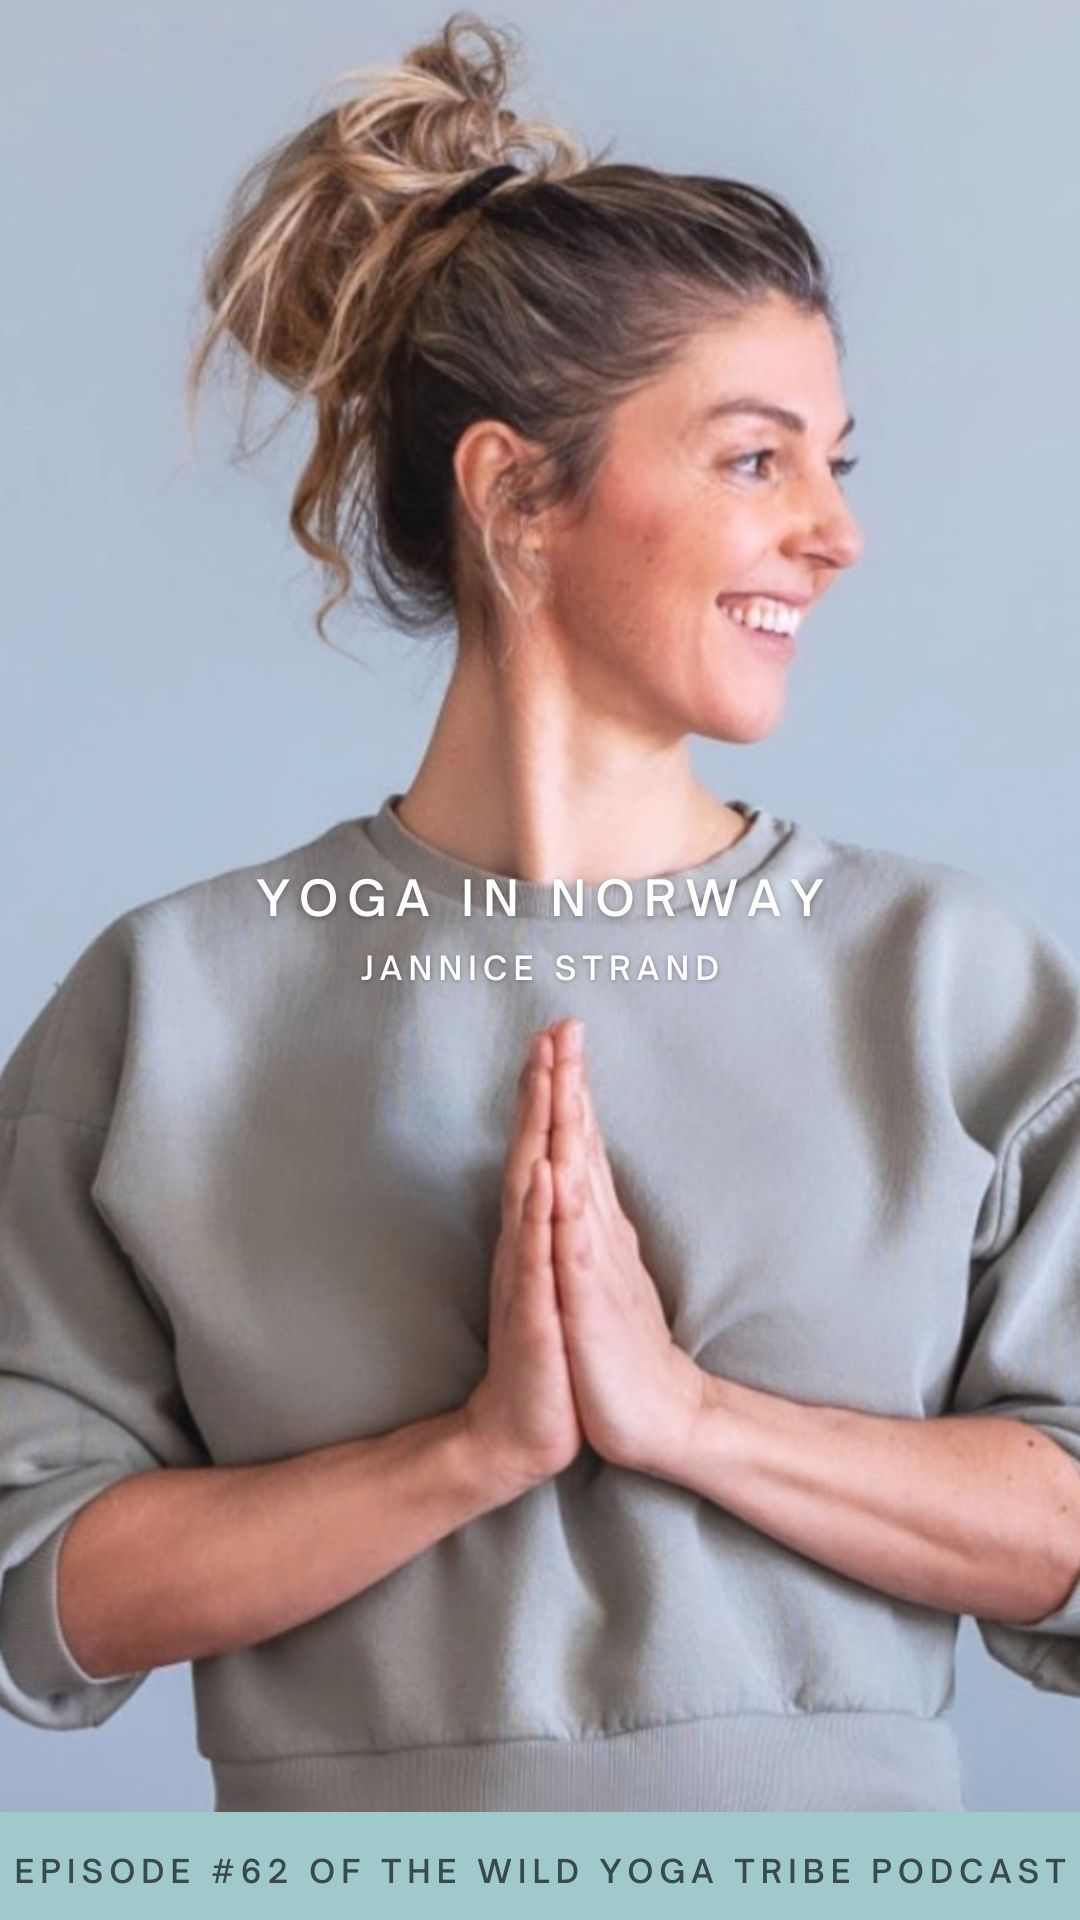 Meet Jannice Strand in a yoga teacher from Norway who shares with us all about how yoga should come with big warnings! Why? Curious? Find out more on the podcast. Welcome to yoga in Norway!